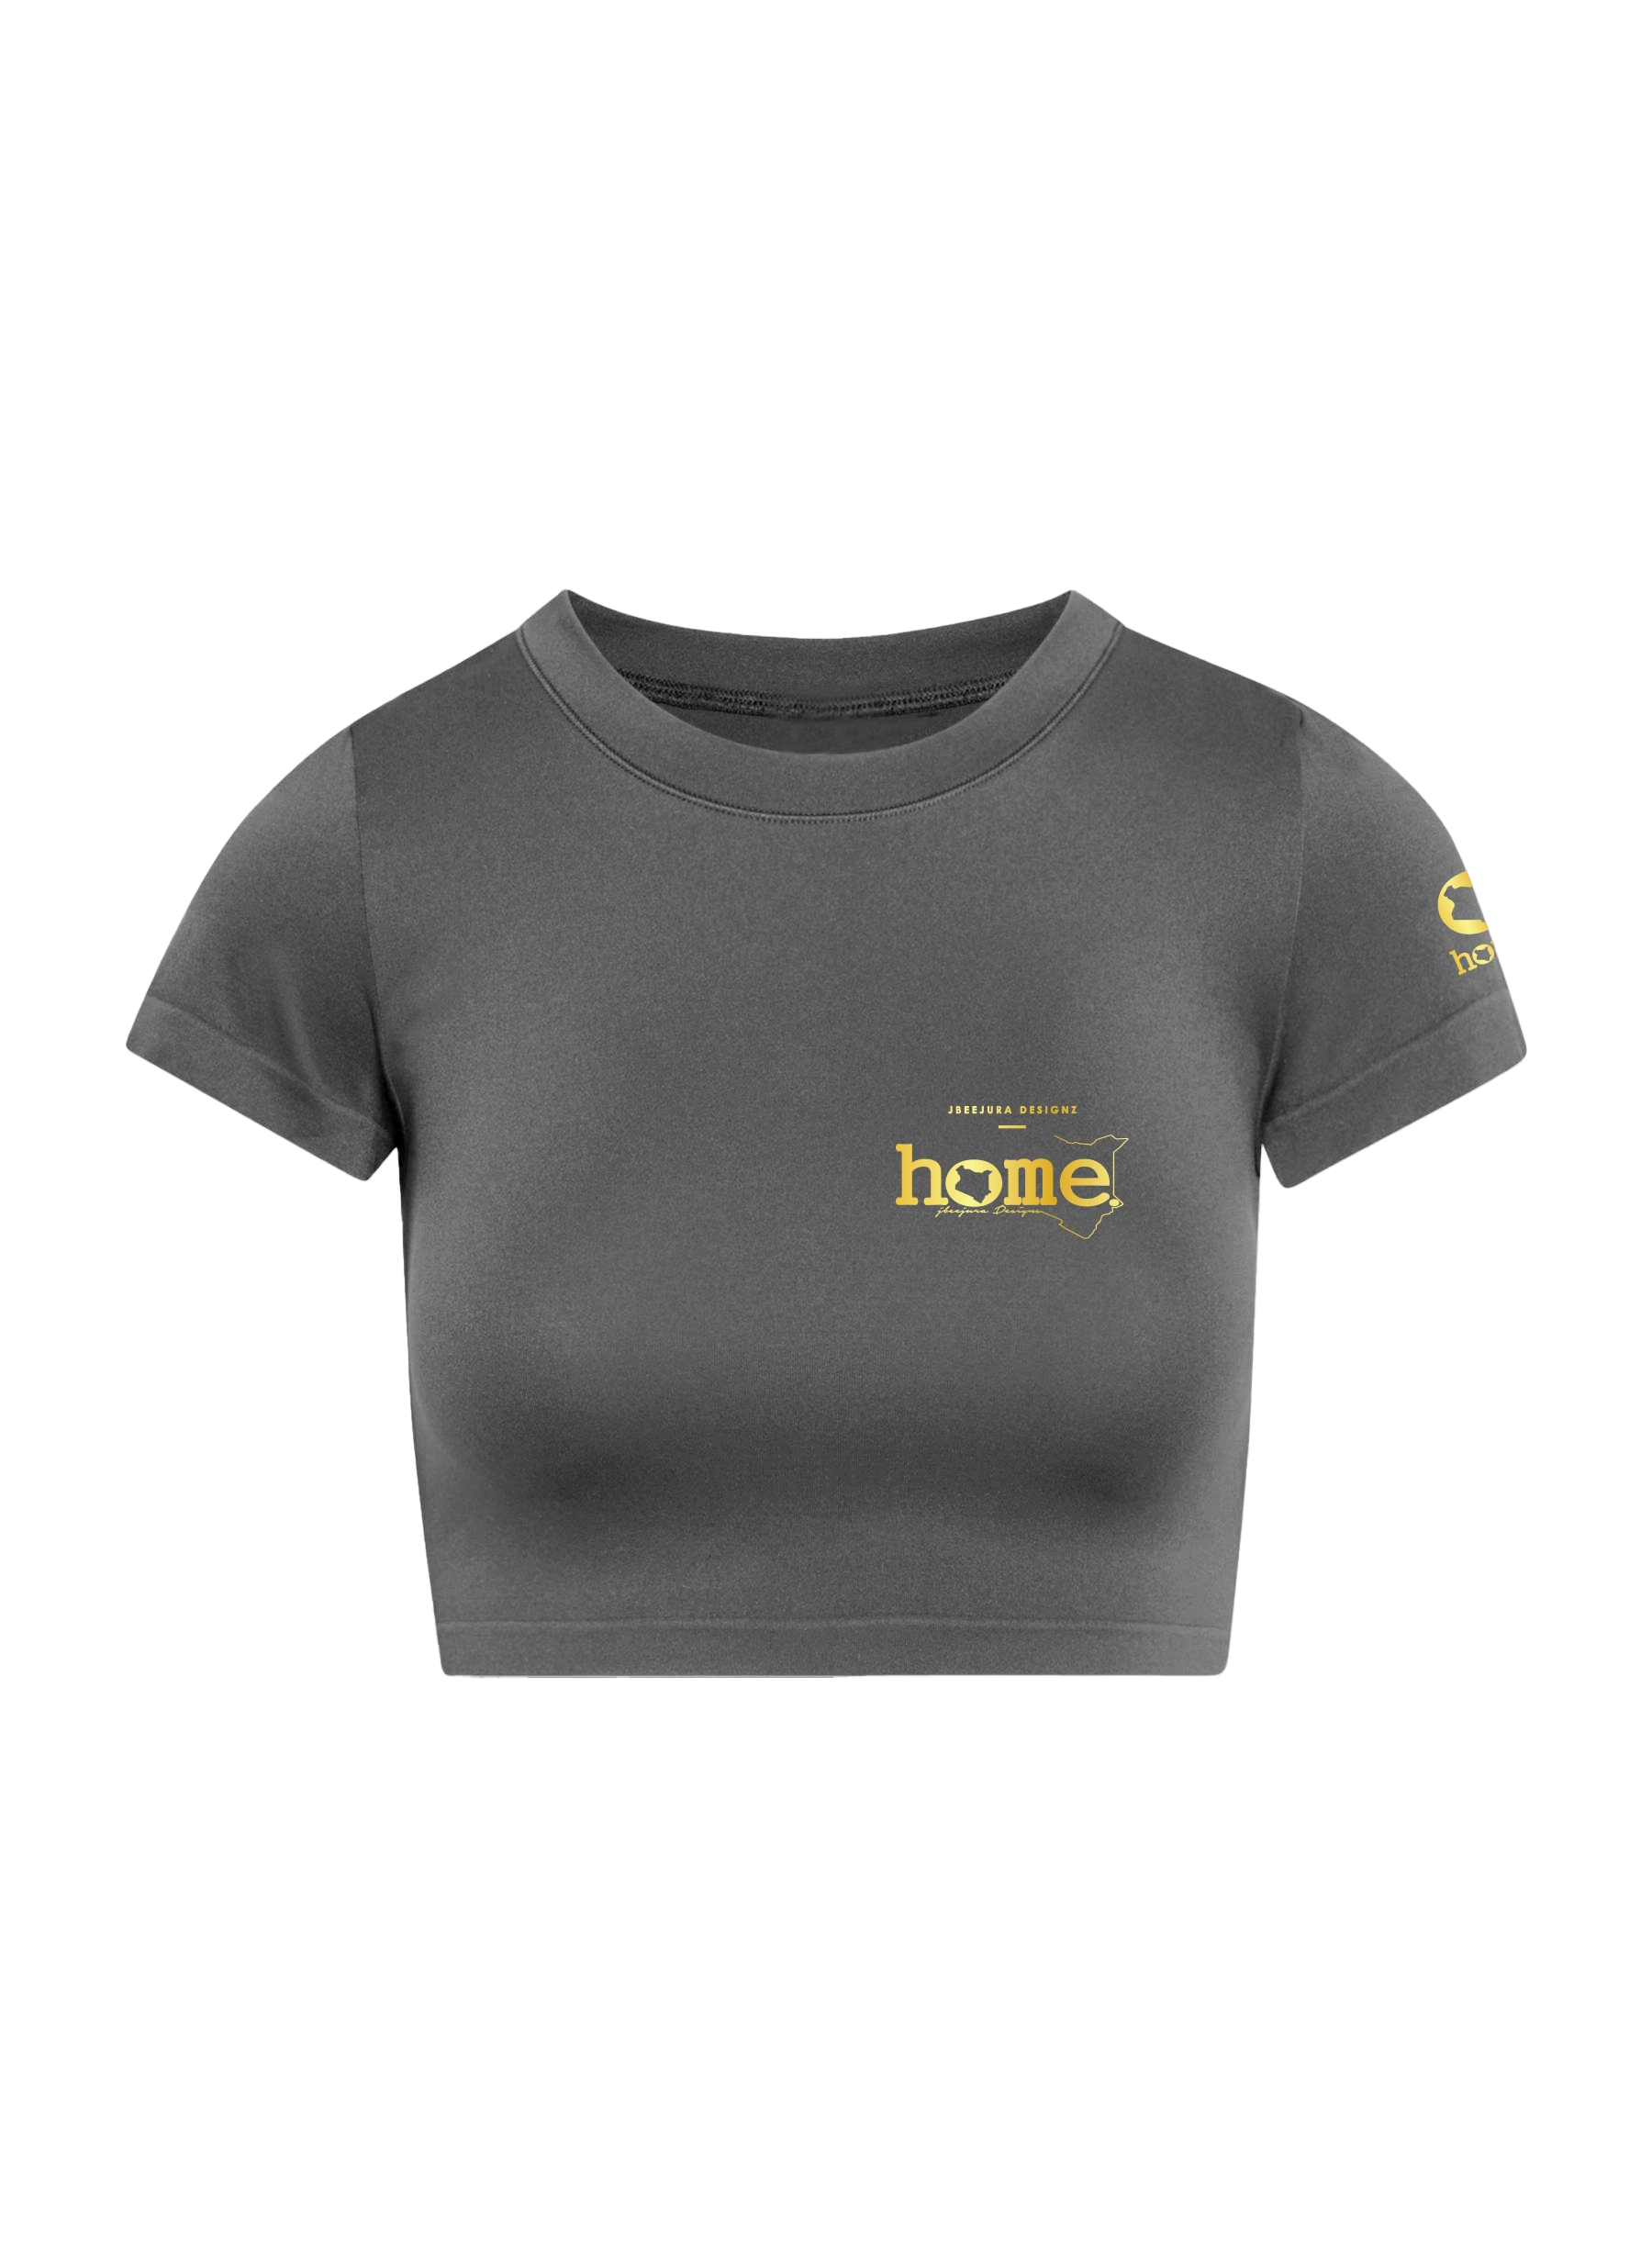 home_254 SHORT SLEEVED SAGE CROPPED ARIA TEE WITH A GOLD 3D WORDS PRINT 